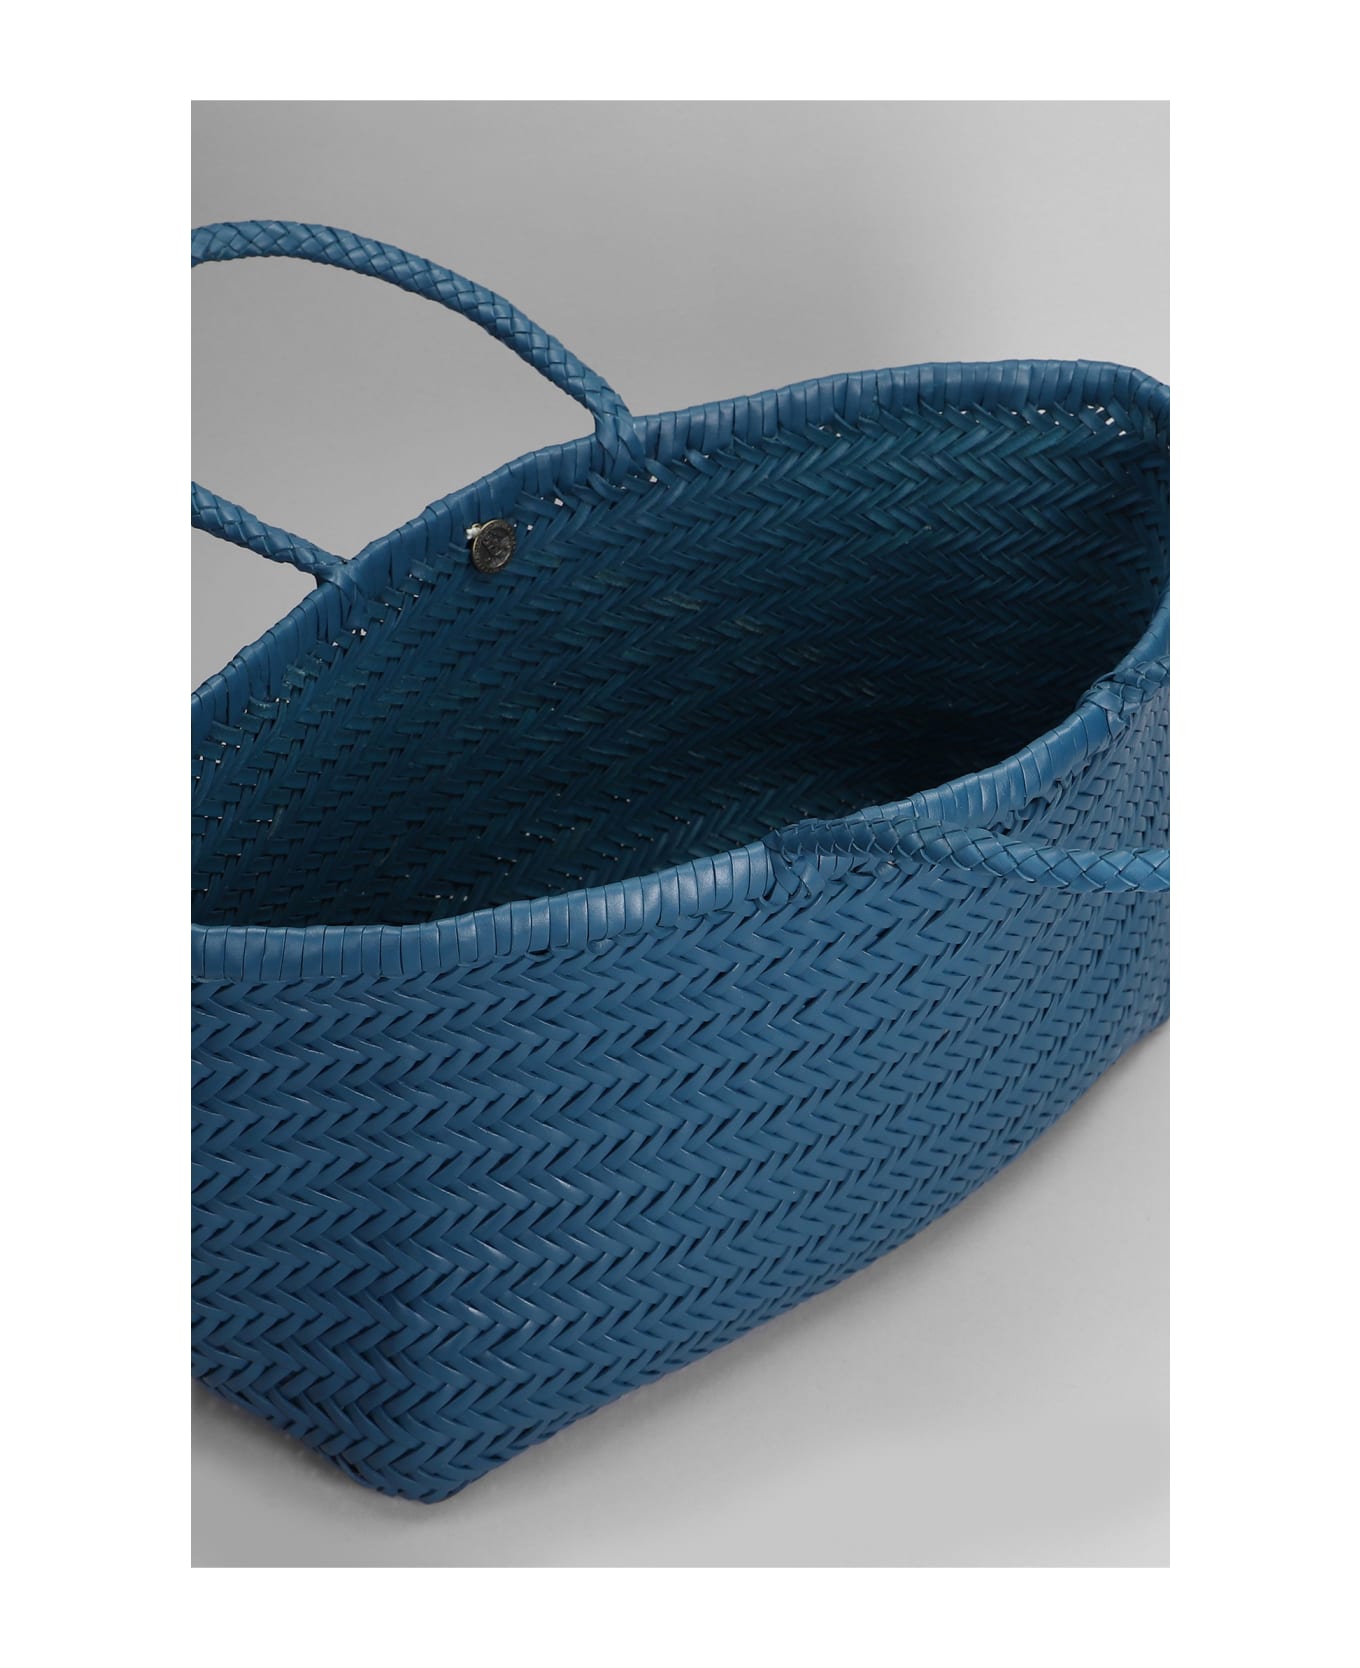 Dragon Diffusion Bamboo Triple Jump Tote In Blue Leather - blue